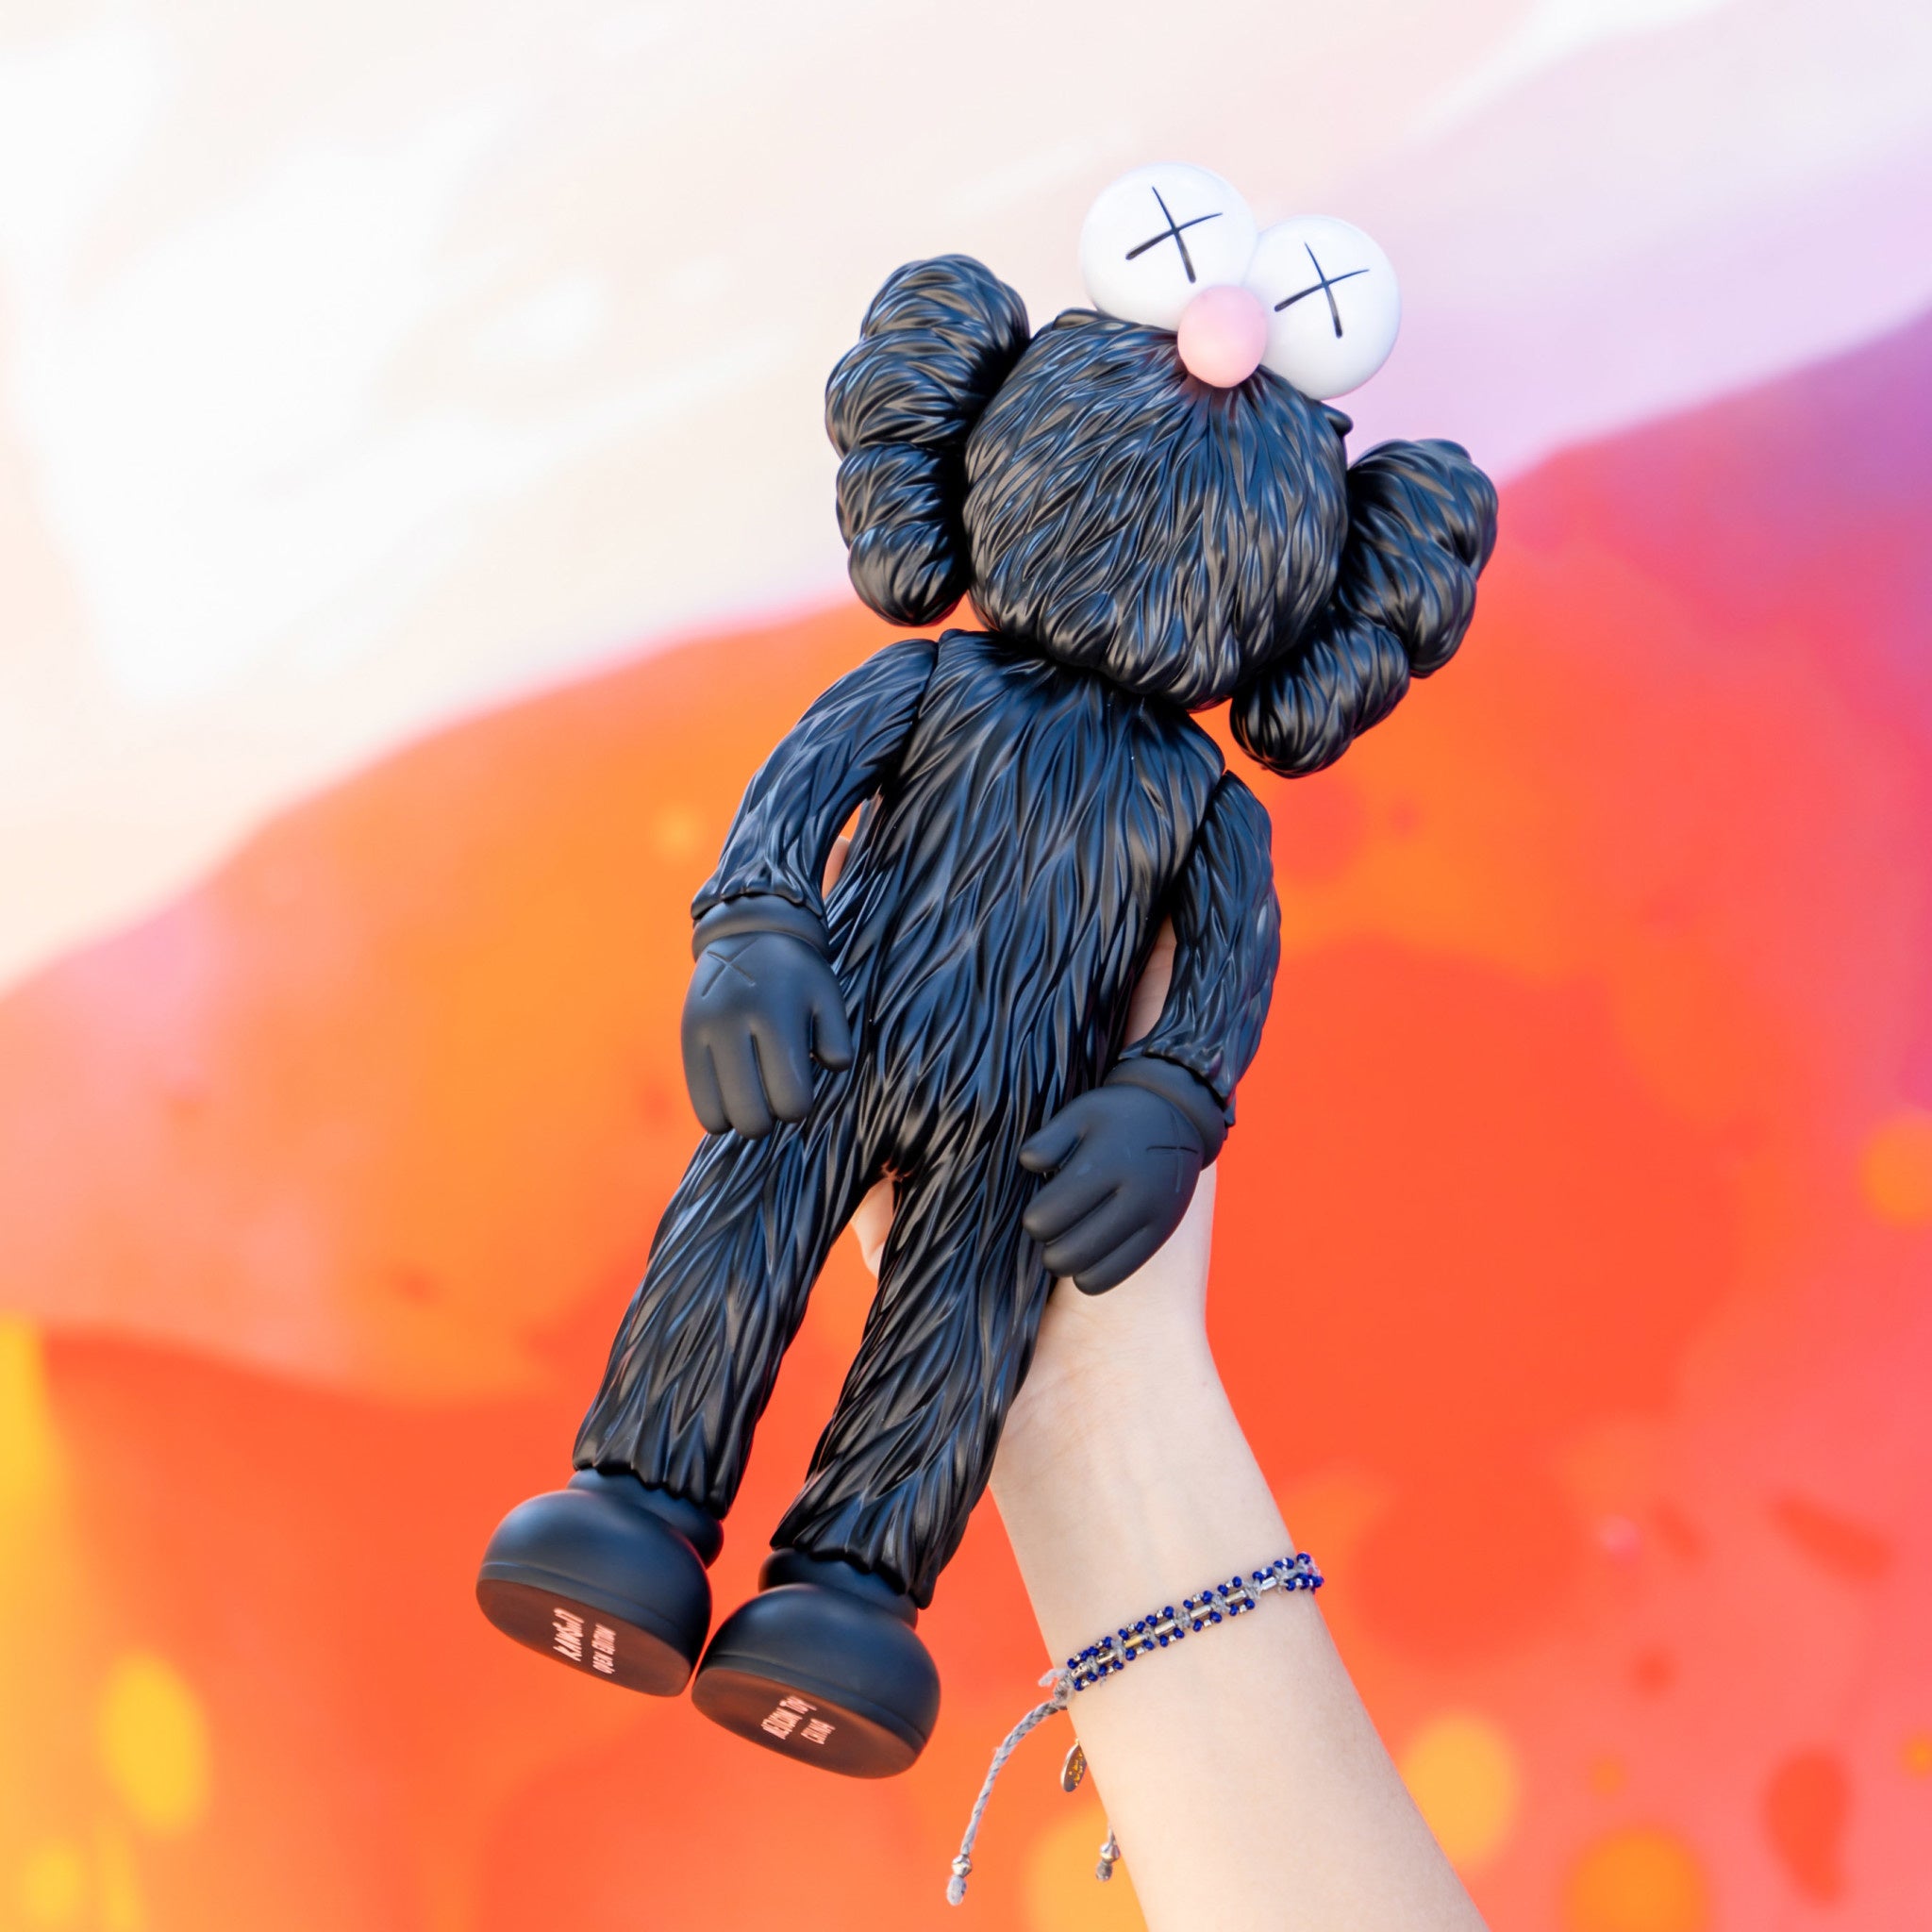 Limited Edition KAWS BFF Black: Secure Your Authentic Art